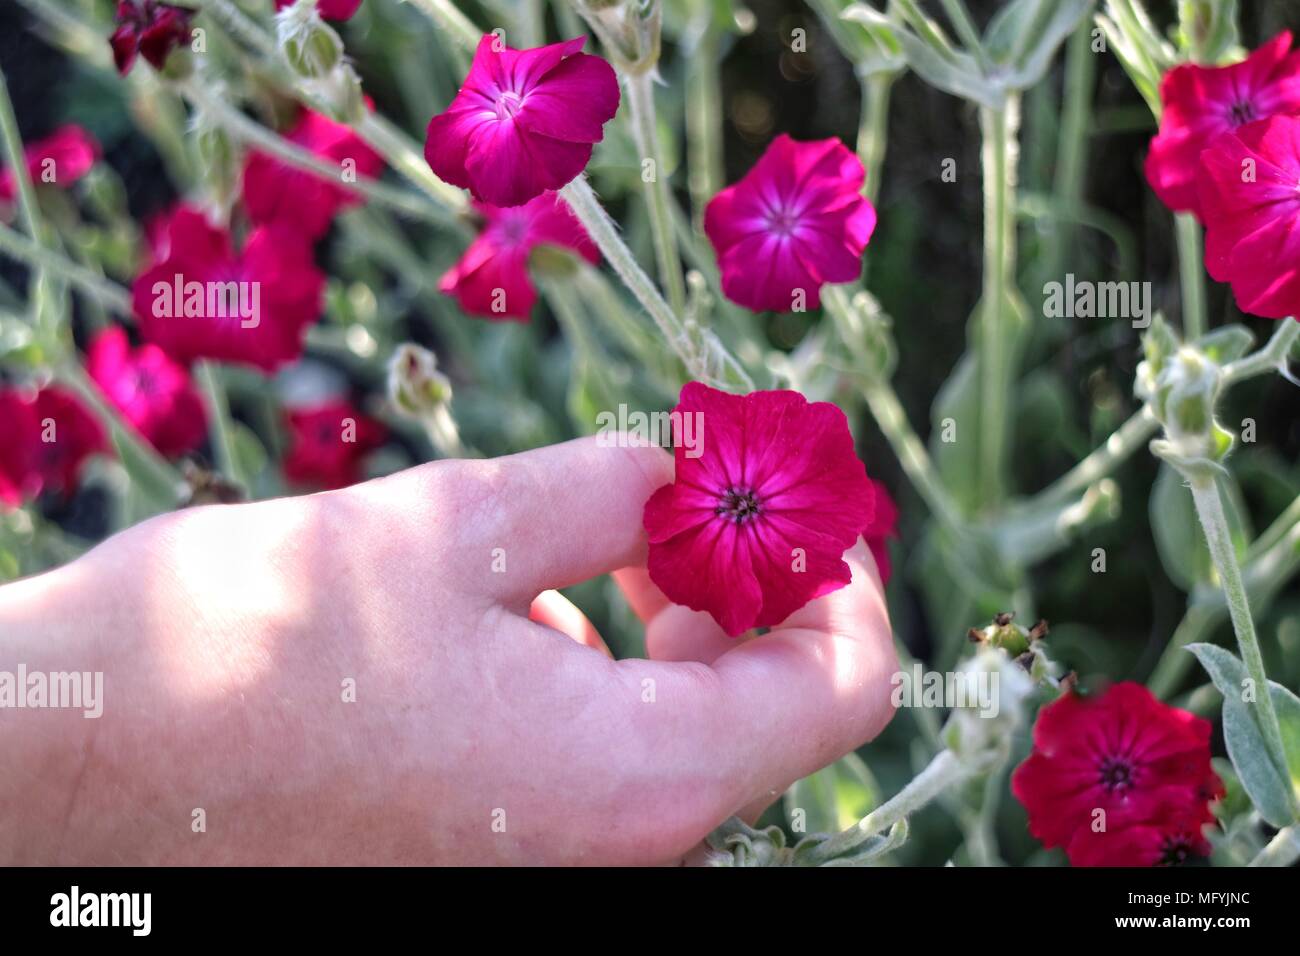 Hands holding flowers Stock Photo